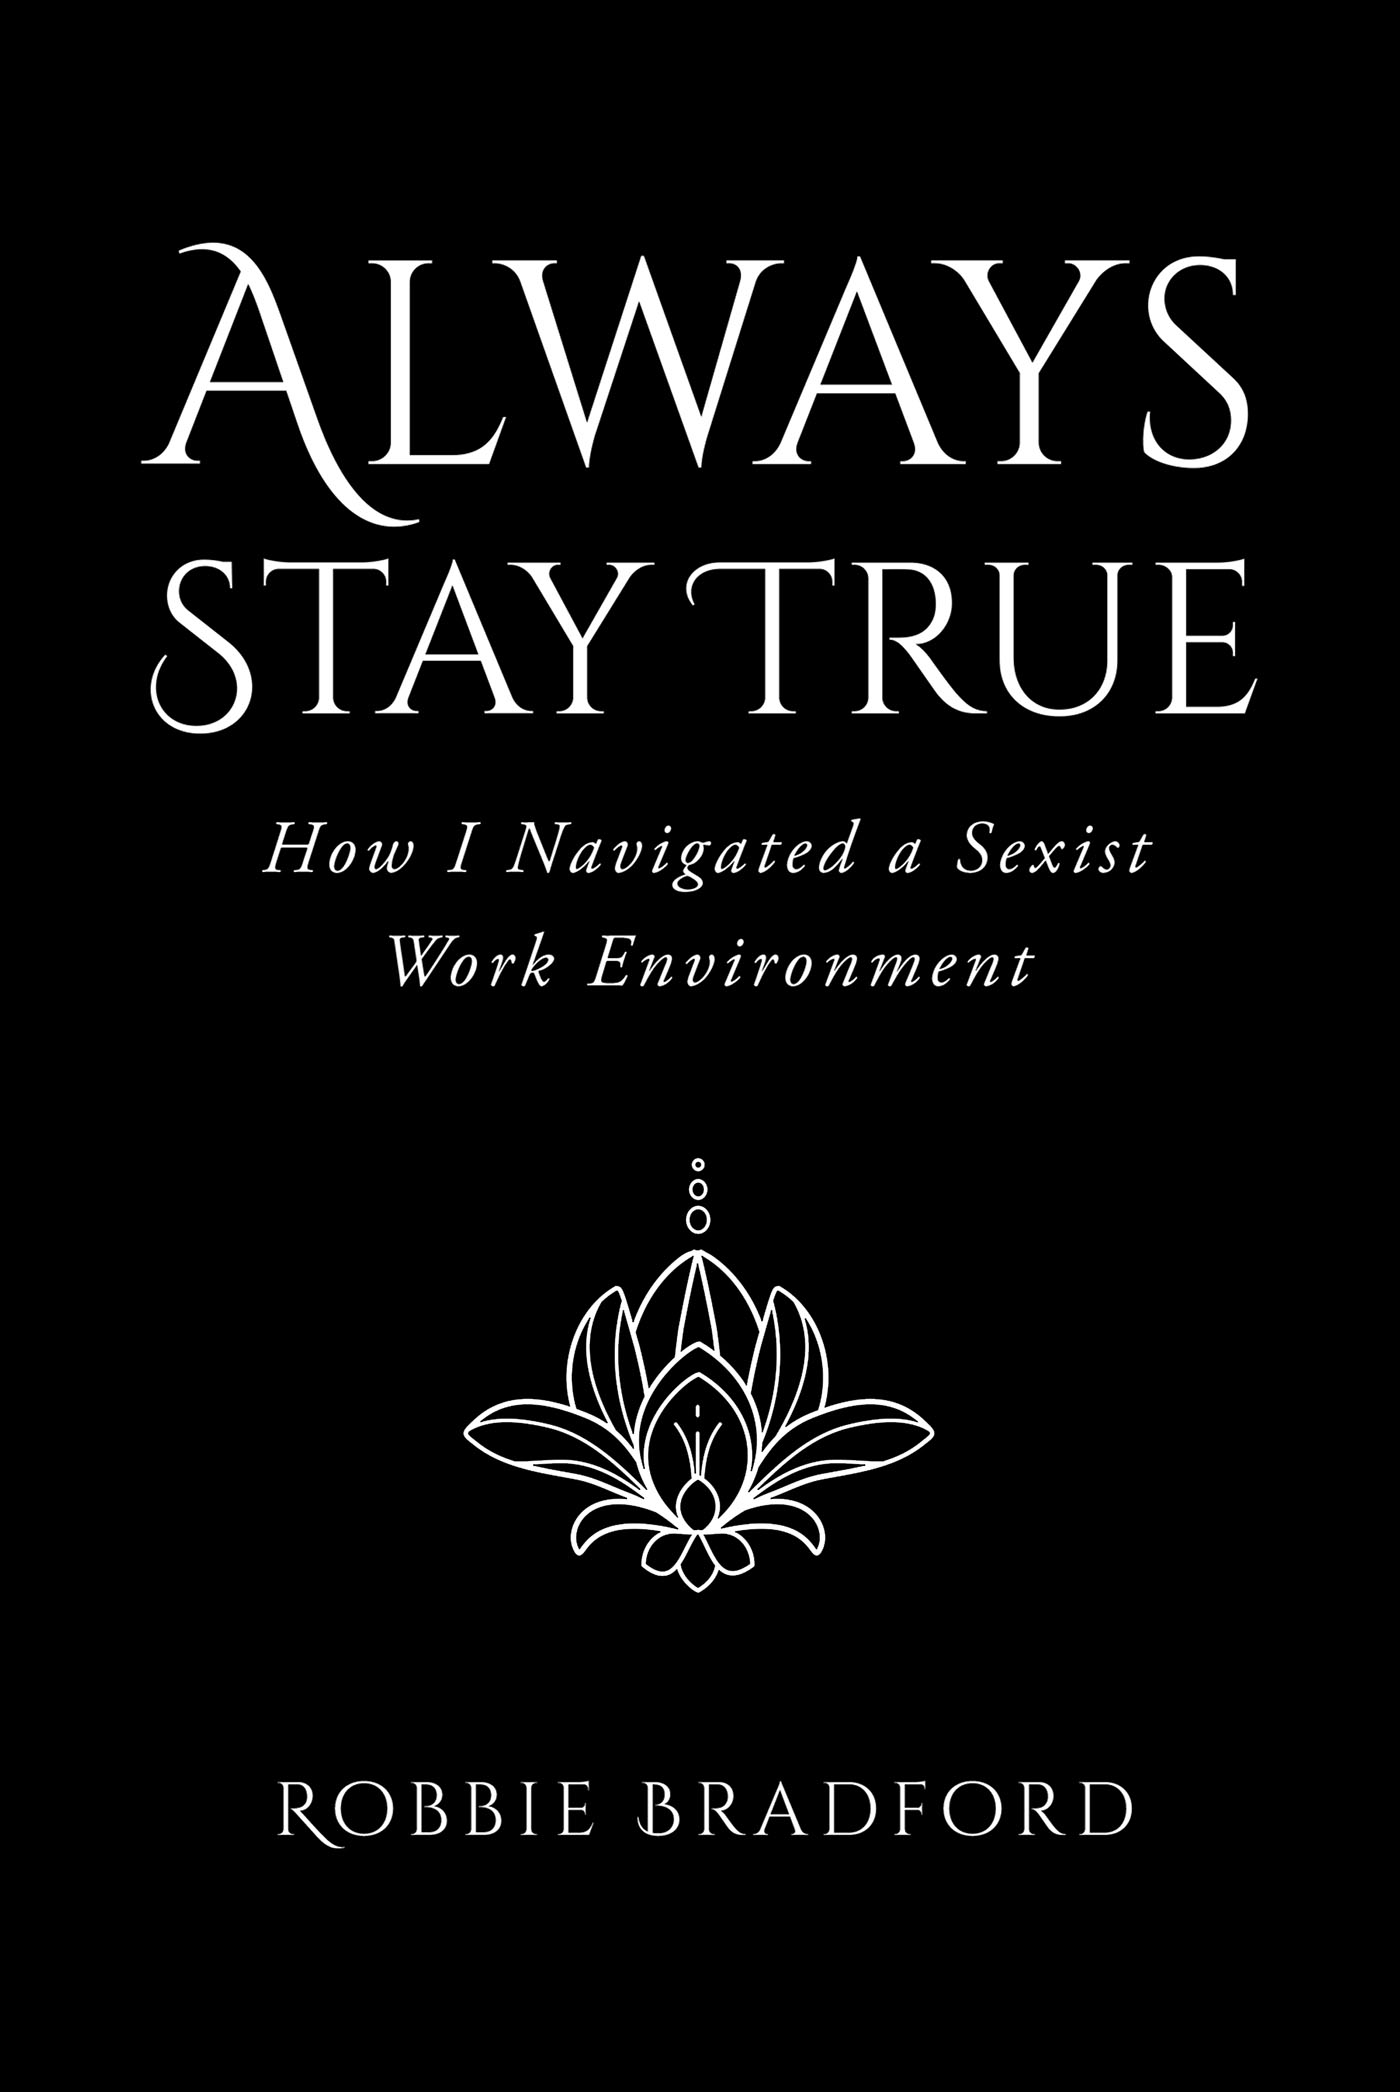 Robbie Bradford’s New Book, "Always Stay True: How I Navigated a Sexist Work Environment," Discusses How the Author Fought Through Rampant Discrimination at Her Job